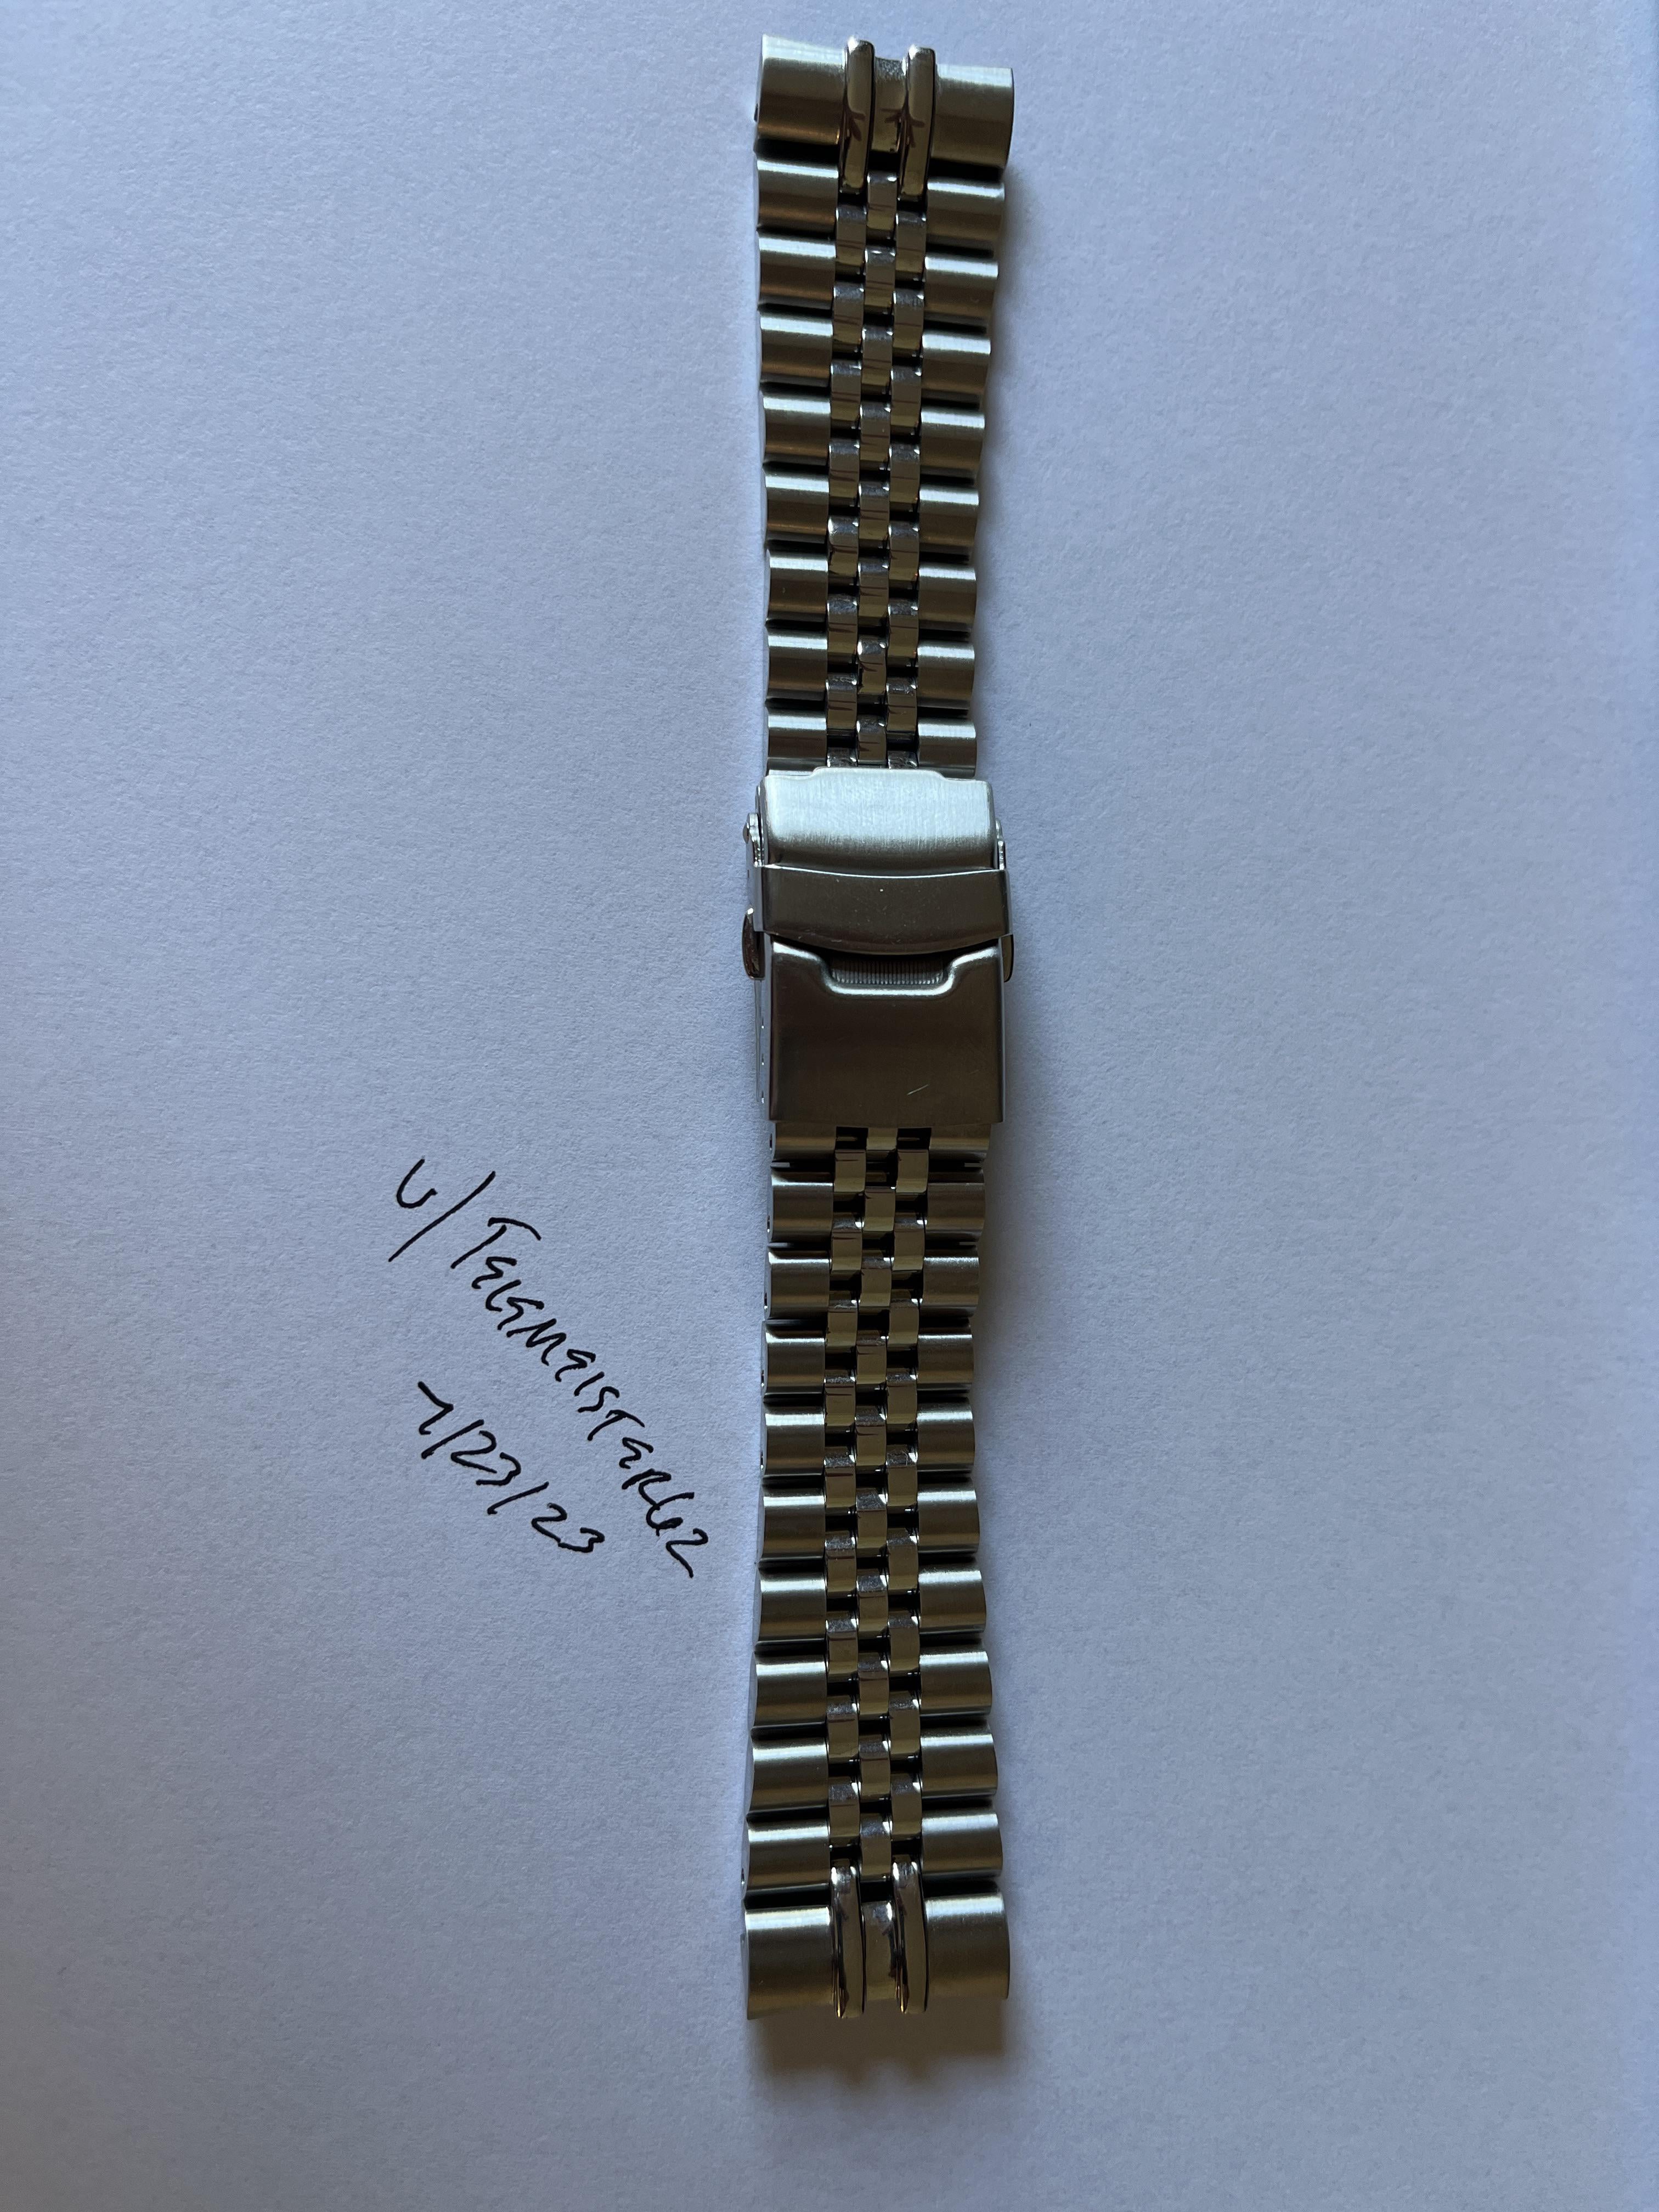 Miltat 22mm Super-J Watch Band for Seiko Turtle